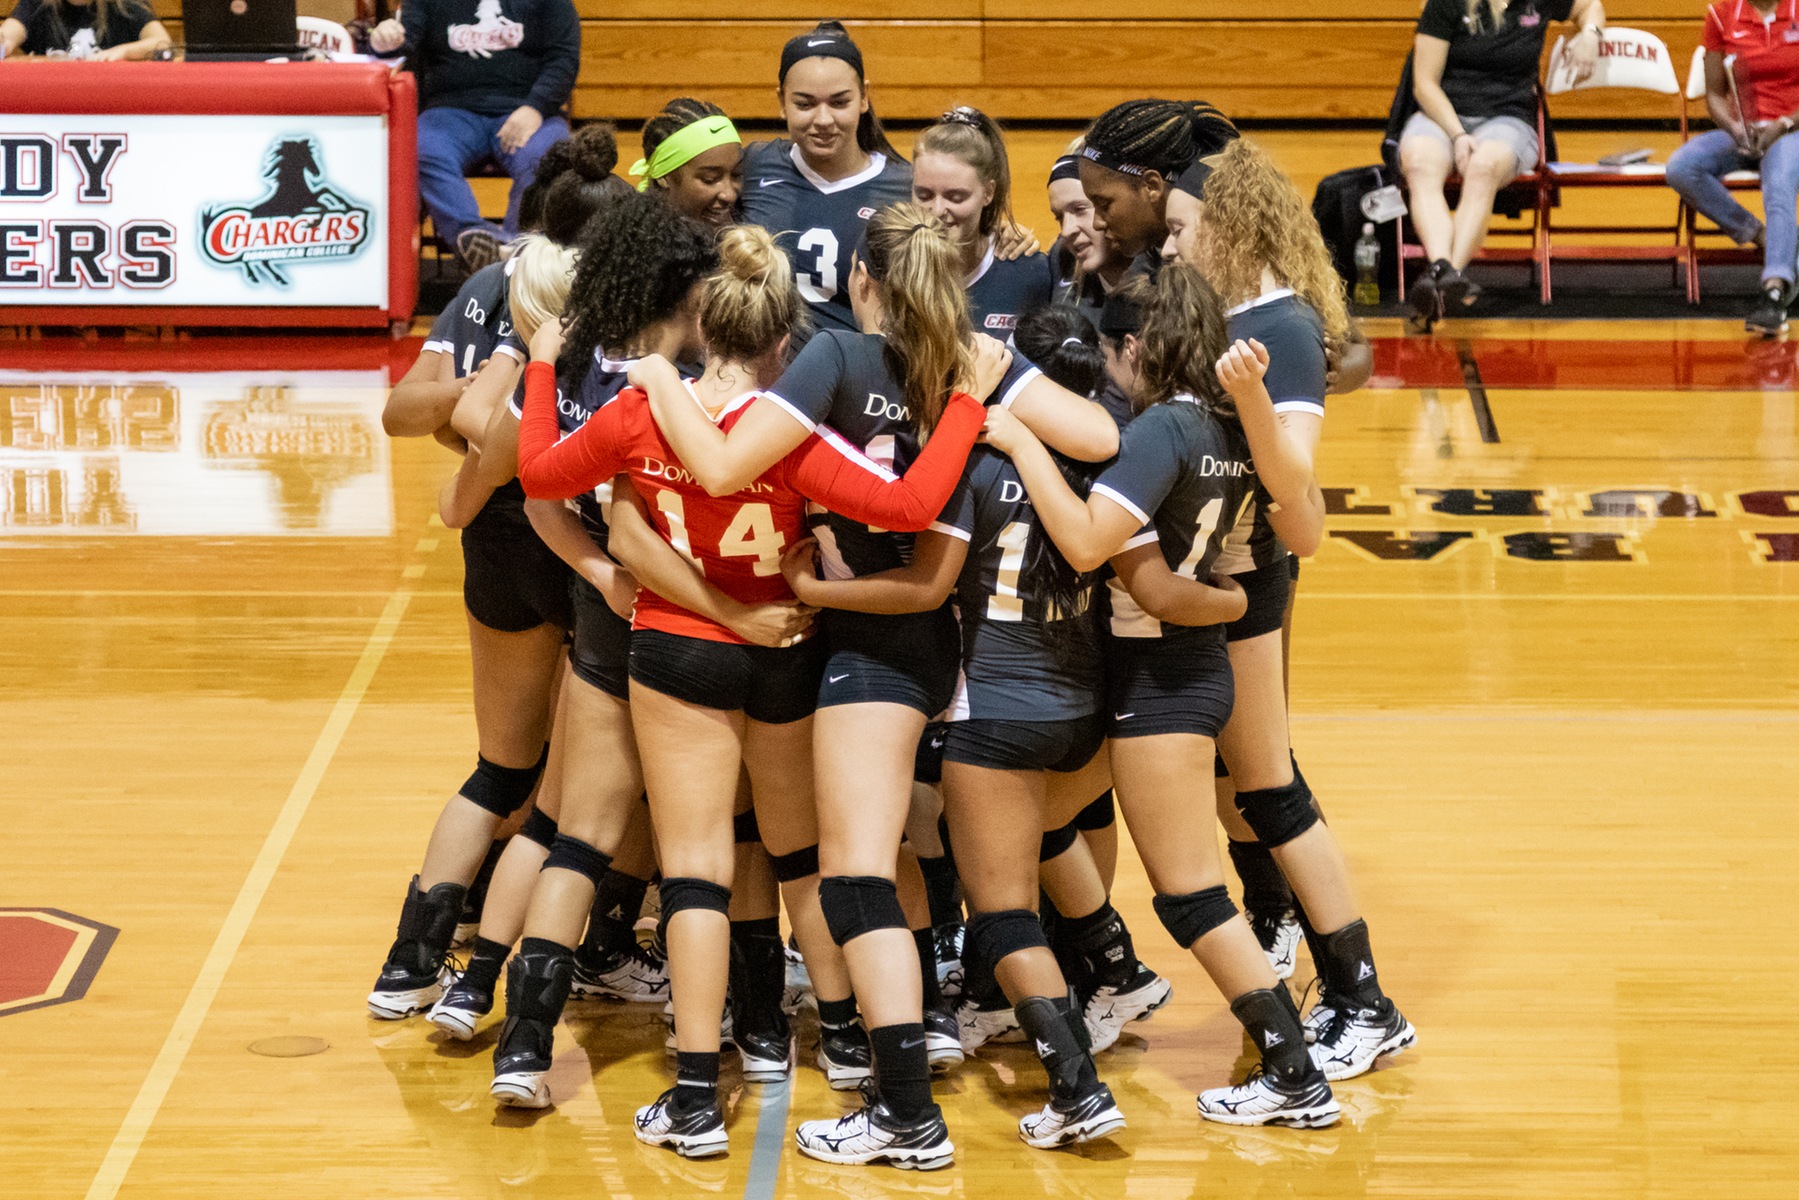 NYACK RALLIES TO DEFEAT WOMEN'S VOLLEYBALL